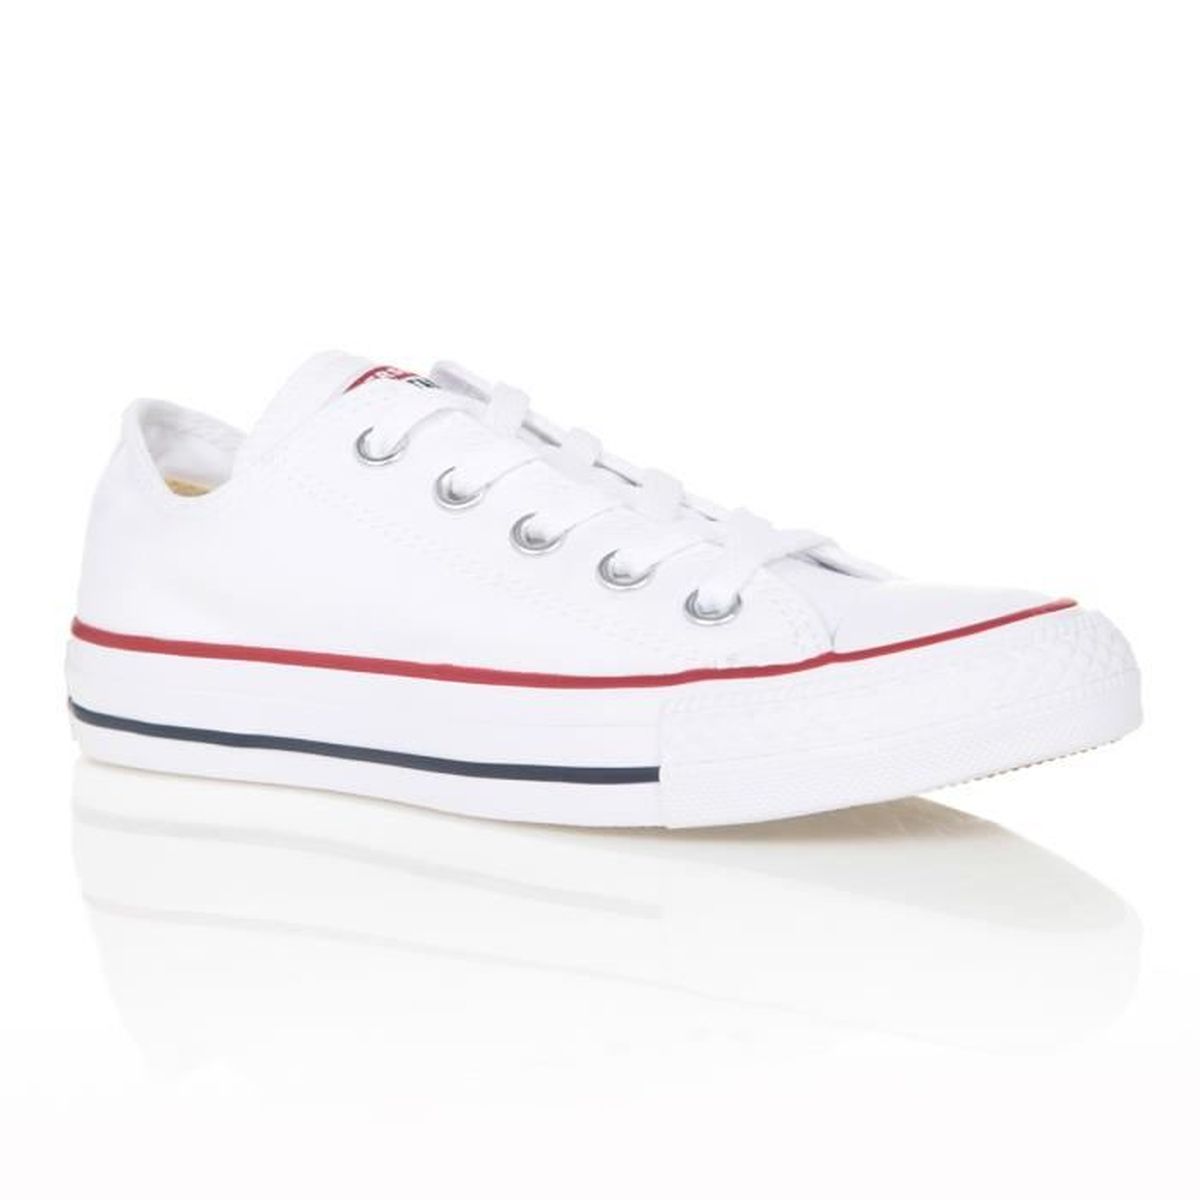 converse basse blanche femme taille 35